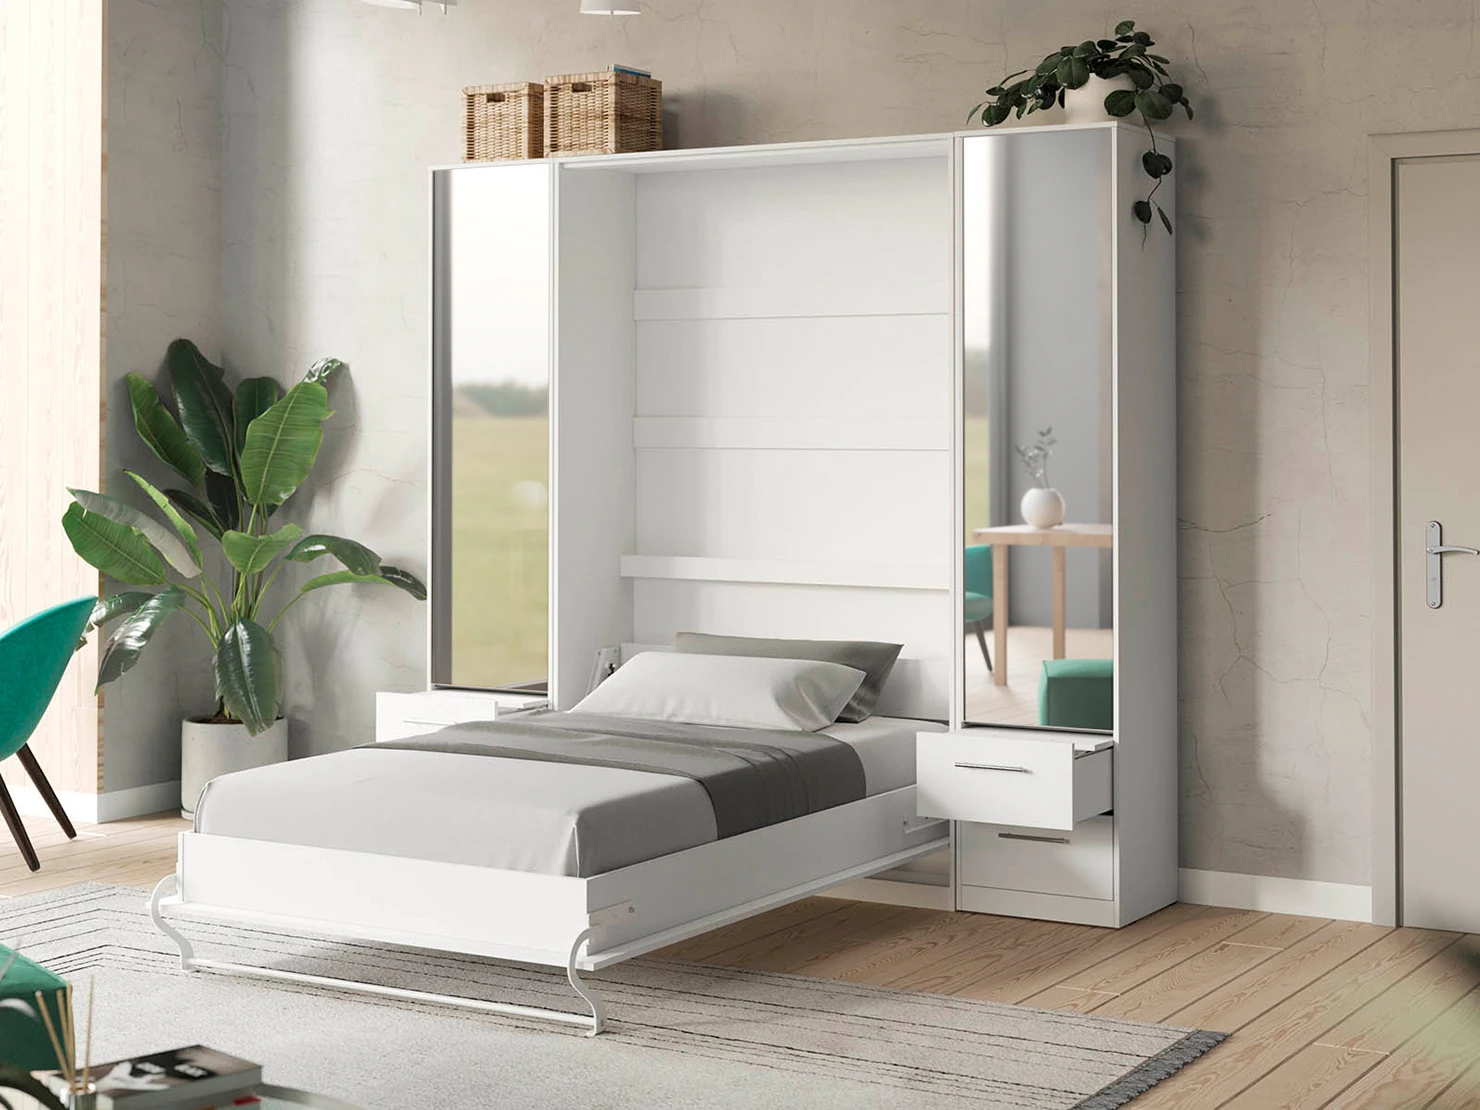 2 Murphy Bed SET 140x200cm Vertical + 2x Cabinets 50cm White/White with Mirror